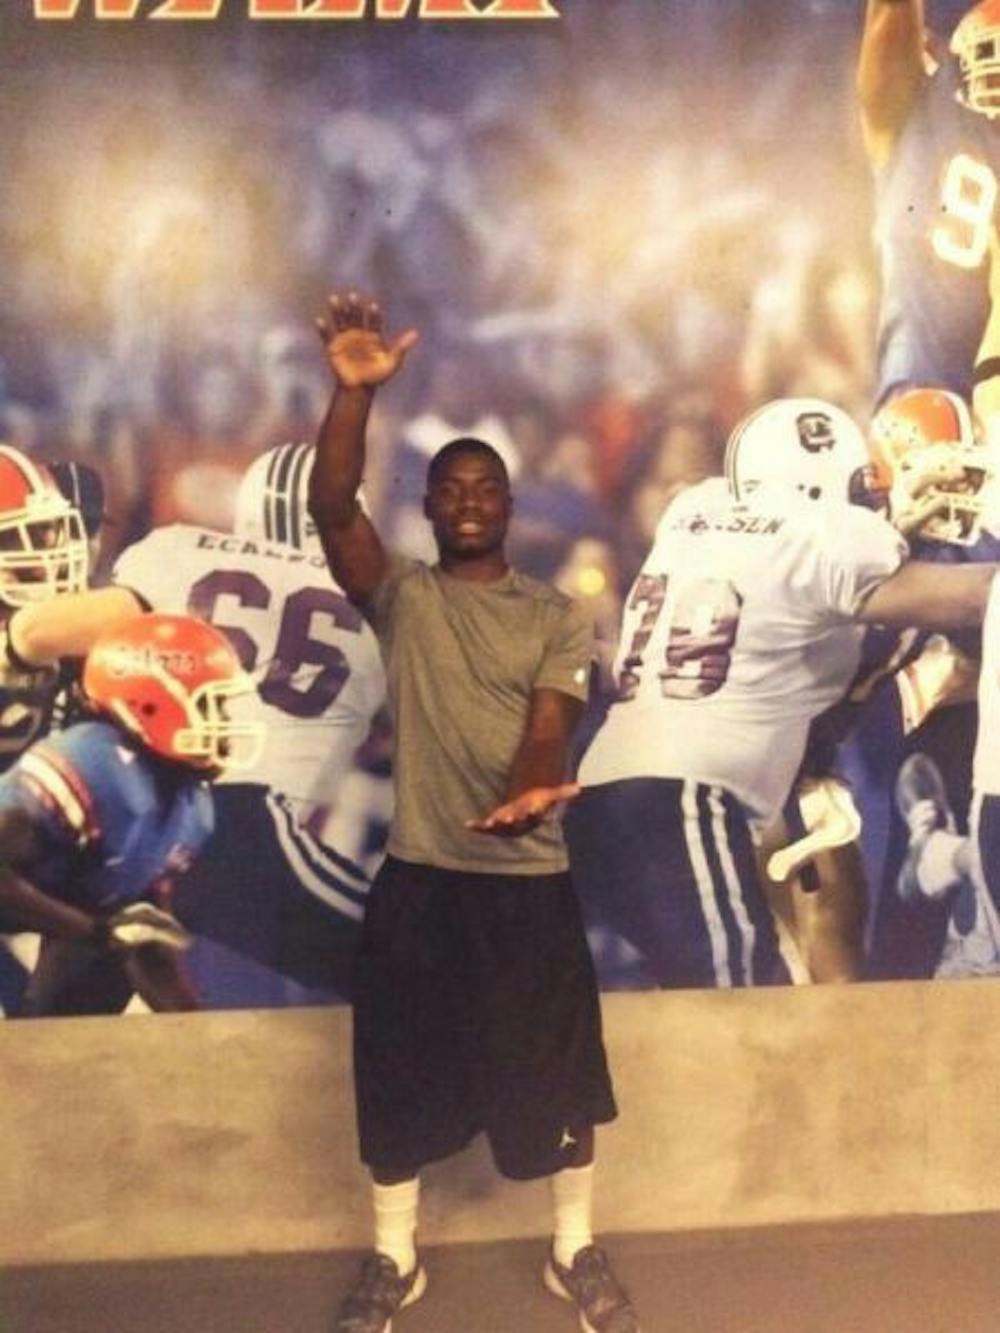 <p>Chauncey Gardner does the Gator Chomp in Ben Hill Griffin Stadium in a photo from his Twitter account (StillDat_) on June 15.</p>